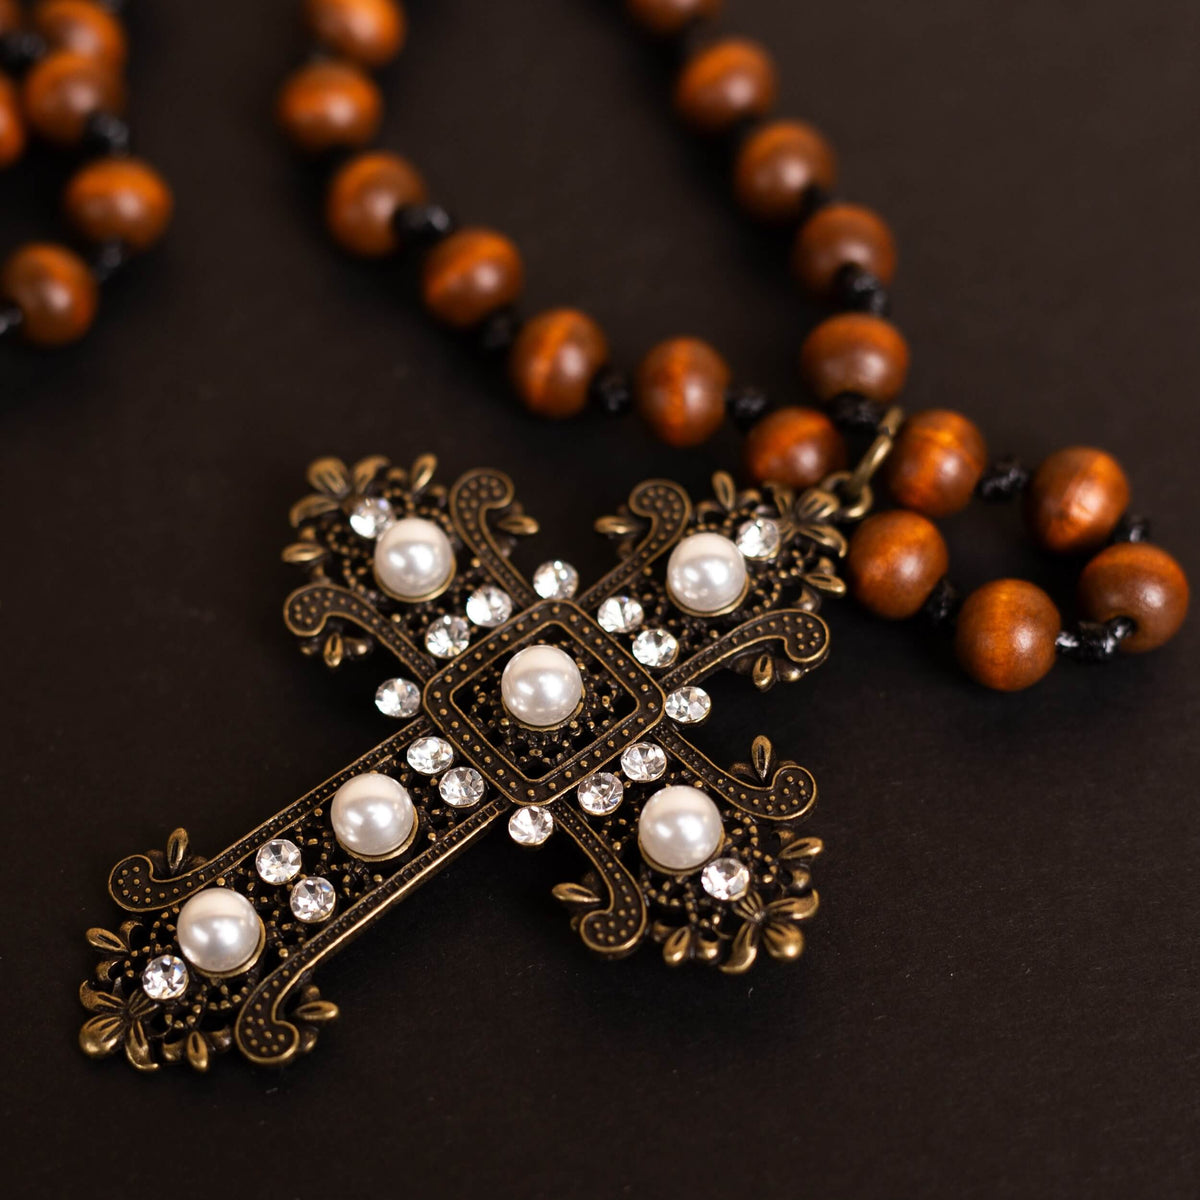 Gold Pearl & Crystal Gothic Cross on Wooden Bead Necklace